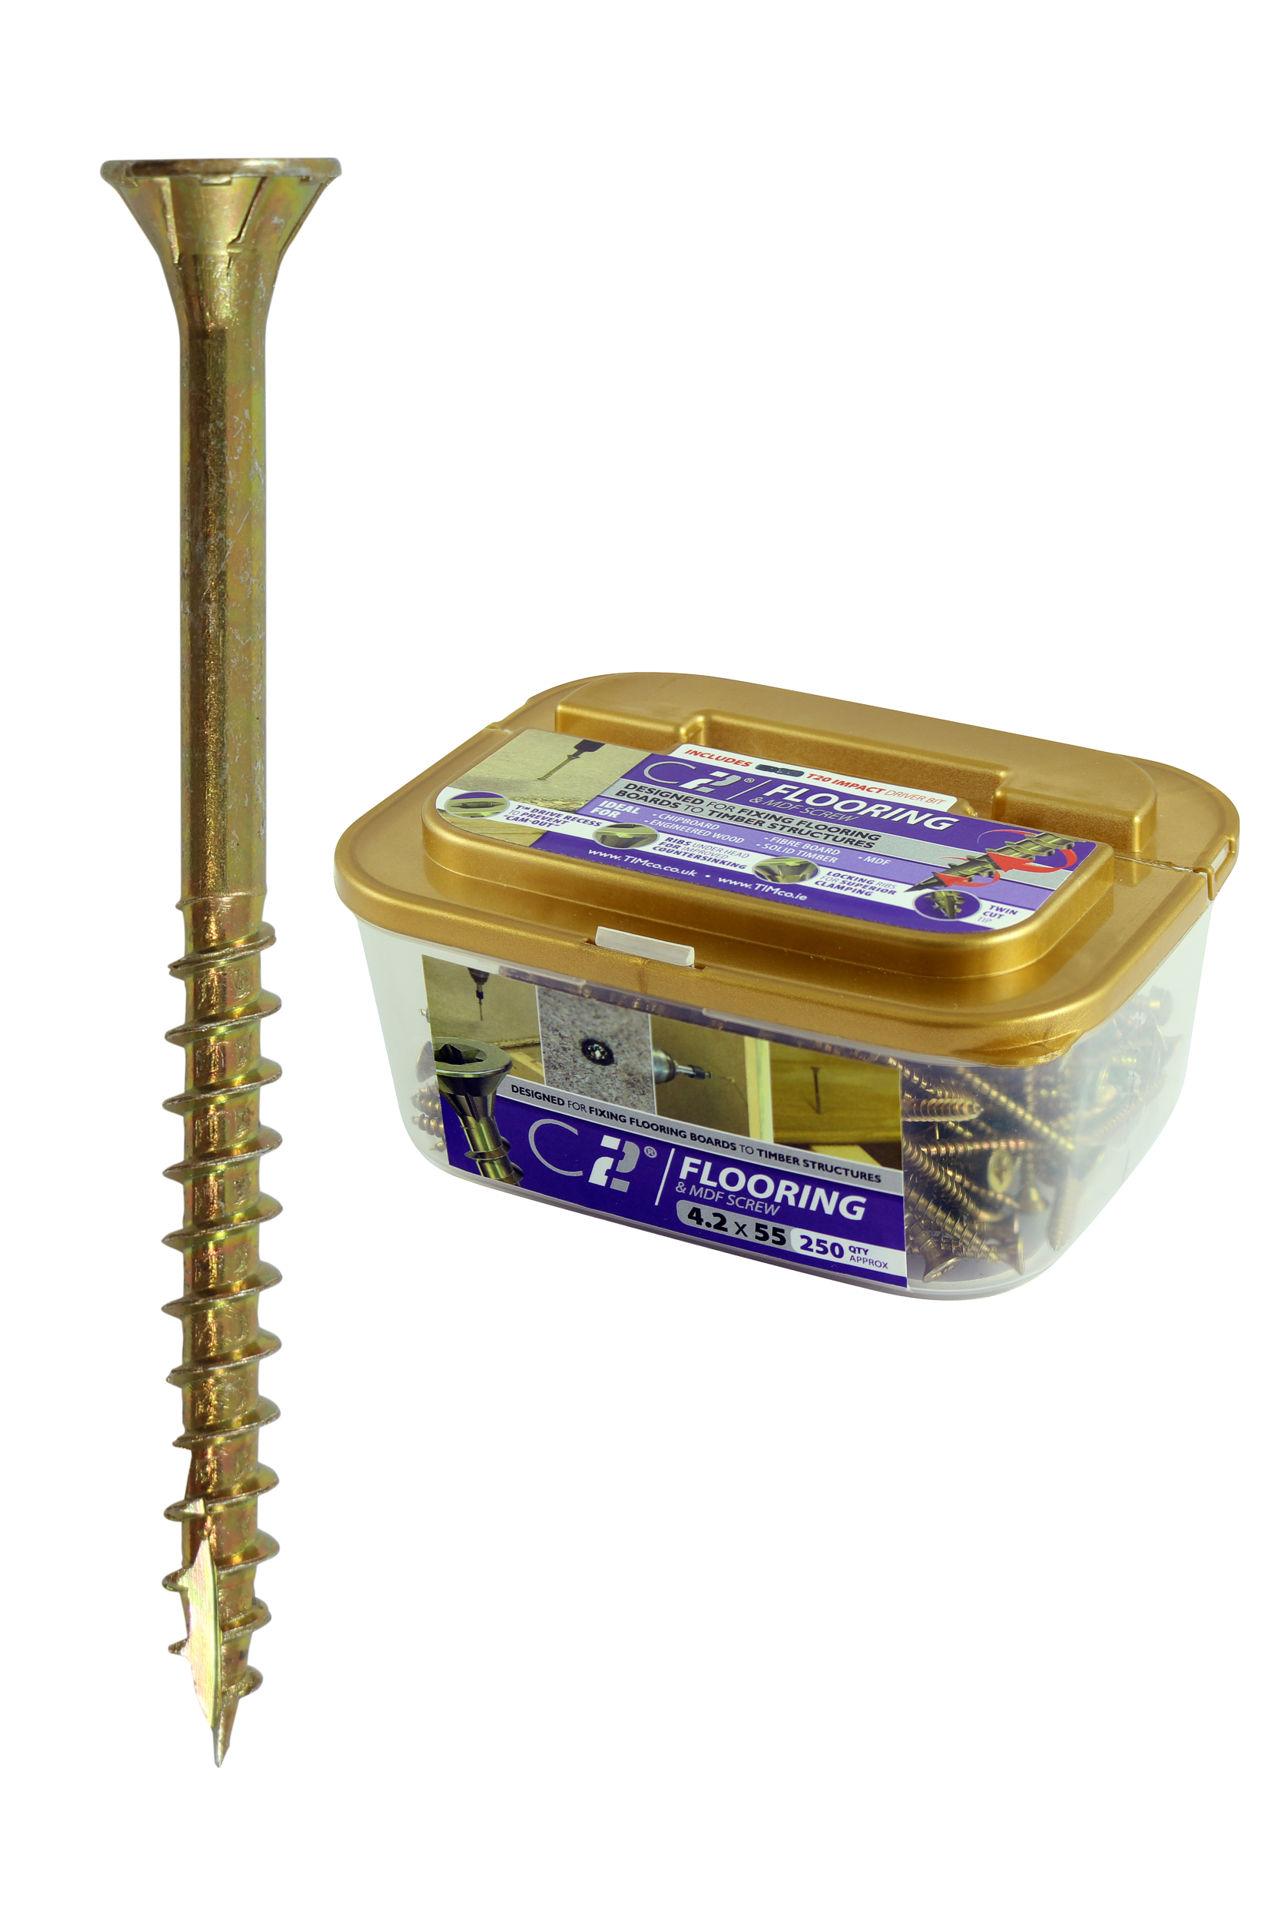 4.2 x 55 Screws for Fixing Flooring, Floorboards and MDF to Timber Structures